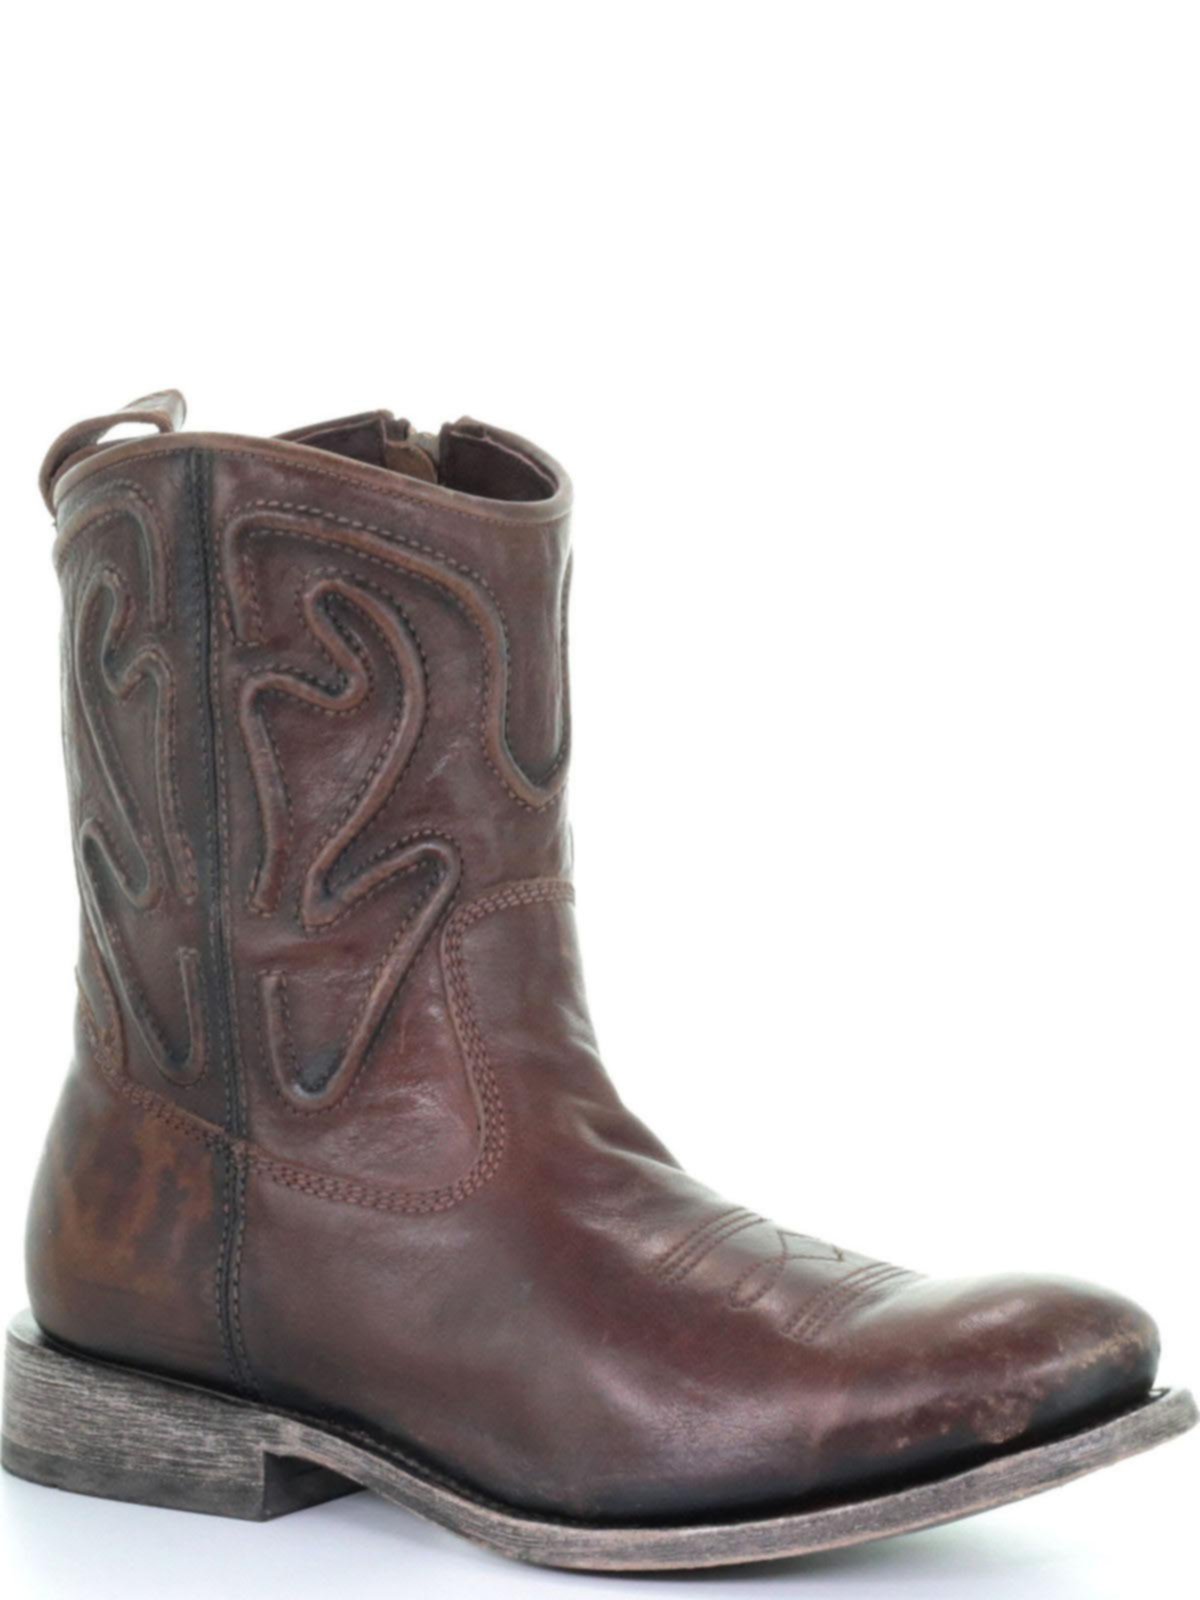 Corral Brown Eagle Inlay Boots R1111 Cowgirl Boots